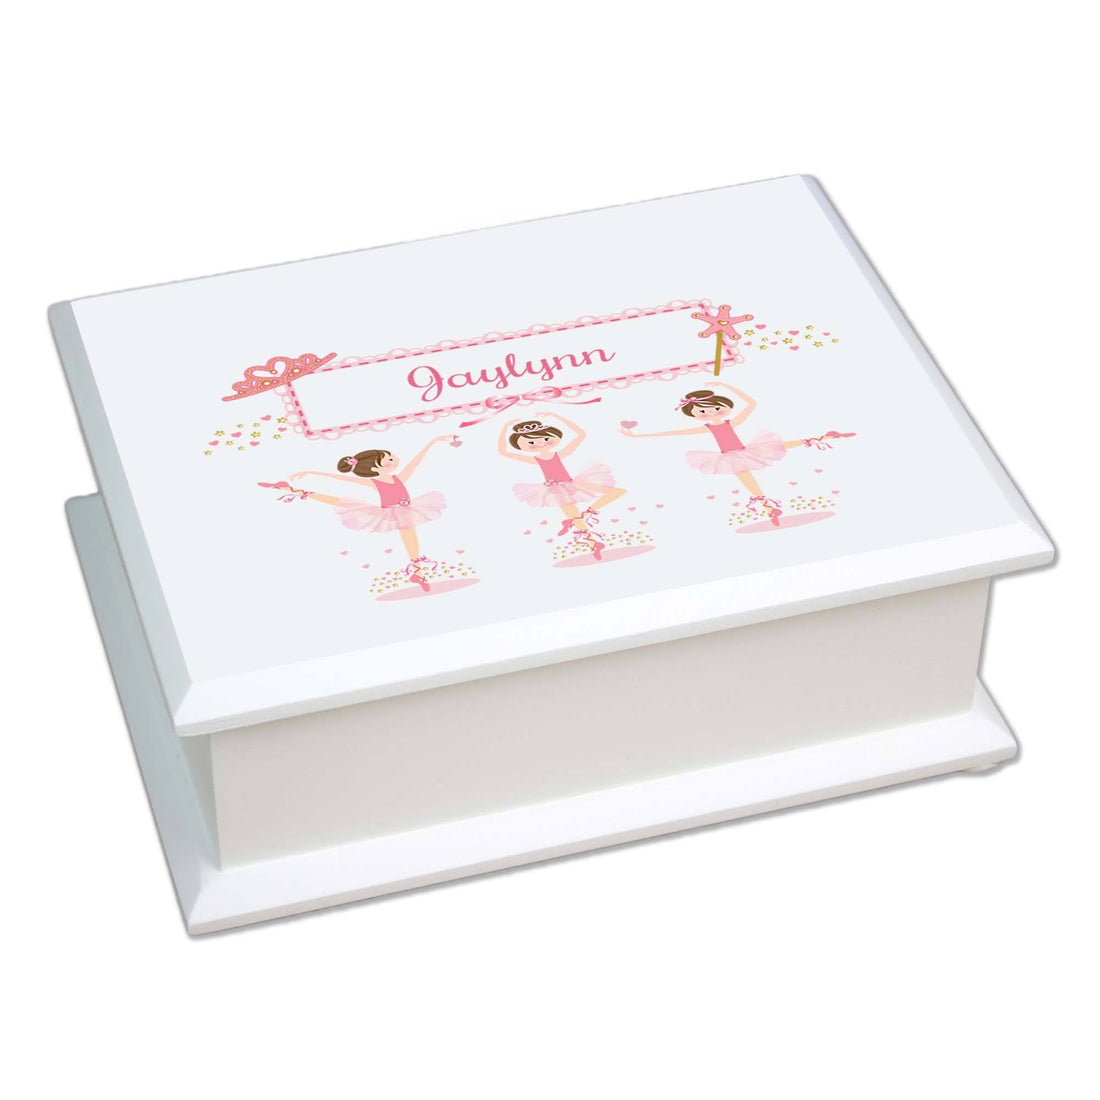 Personalized Lift Top Jewelry Box with Ballerina Brunette design